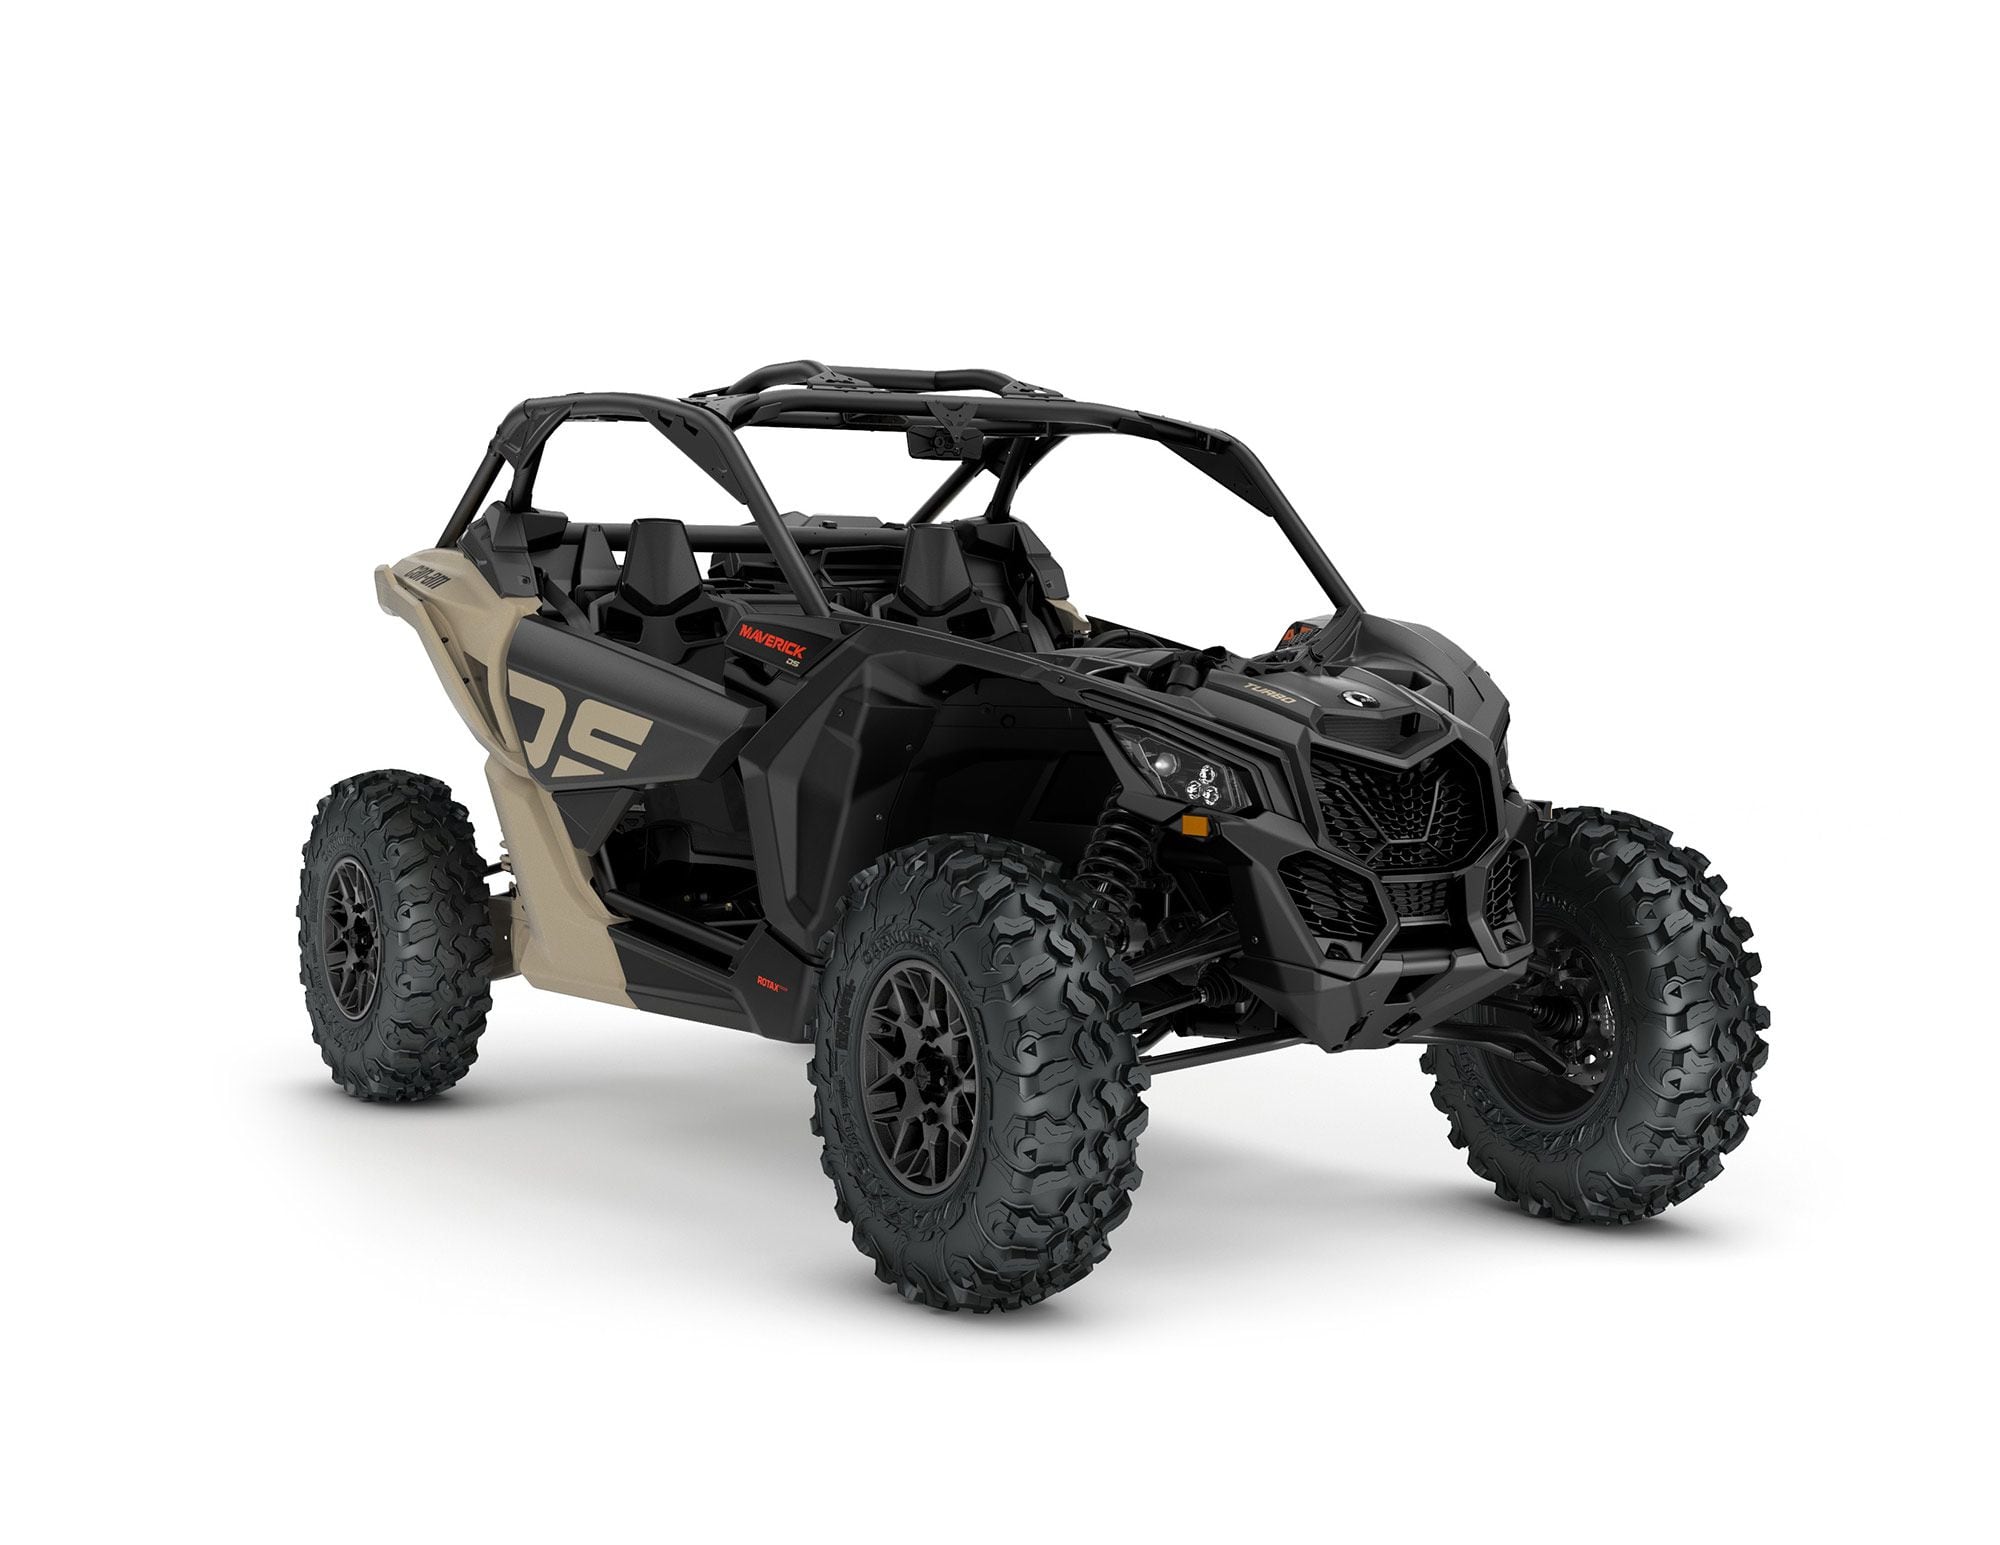 2022 Can-Am Maverick X3 DS Turbo front view in Desert Tan and Carbon Black color.